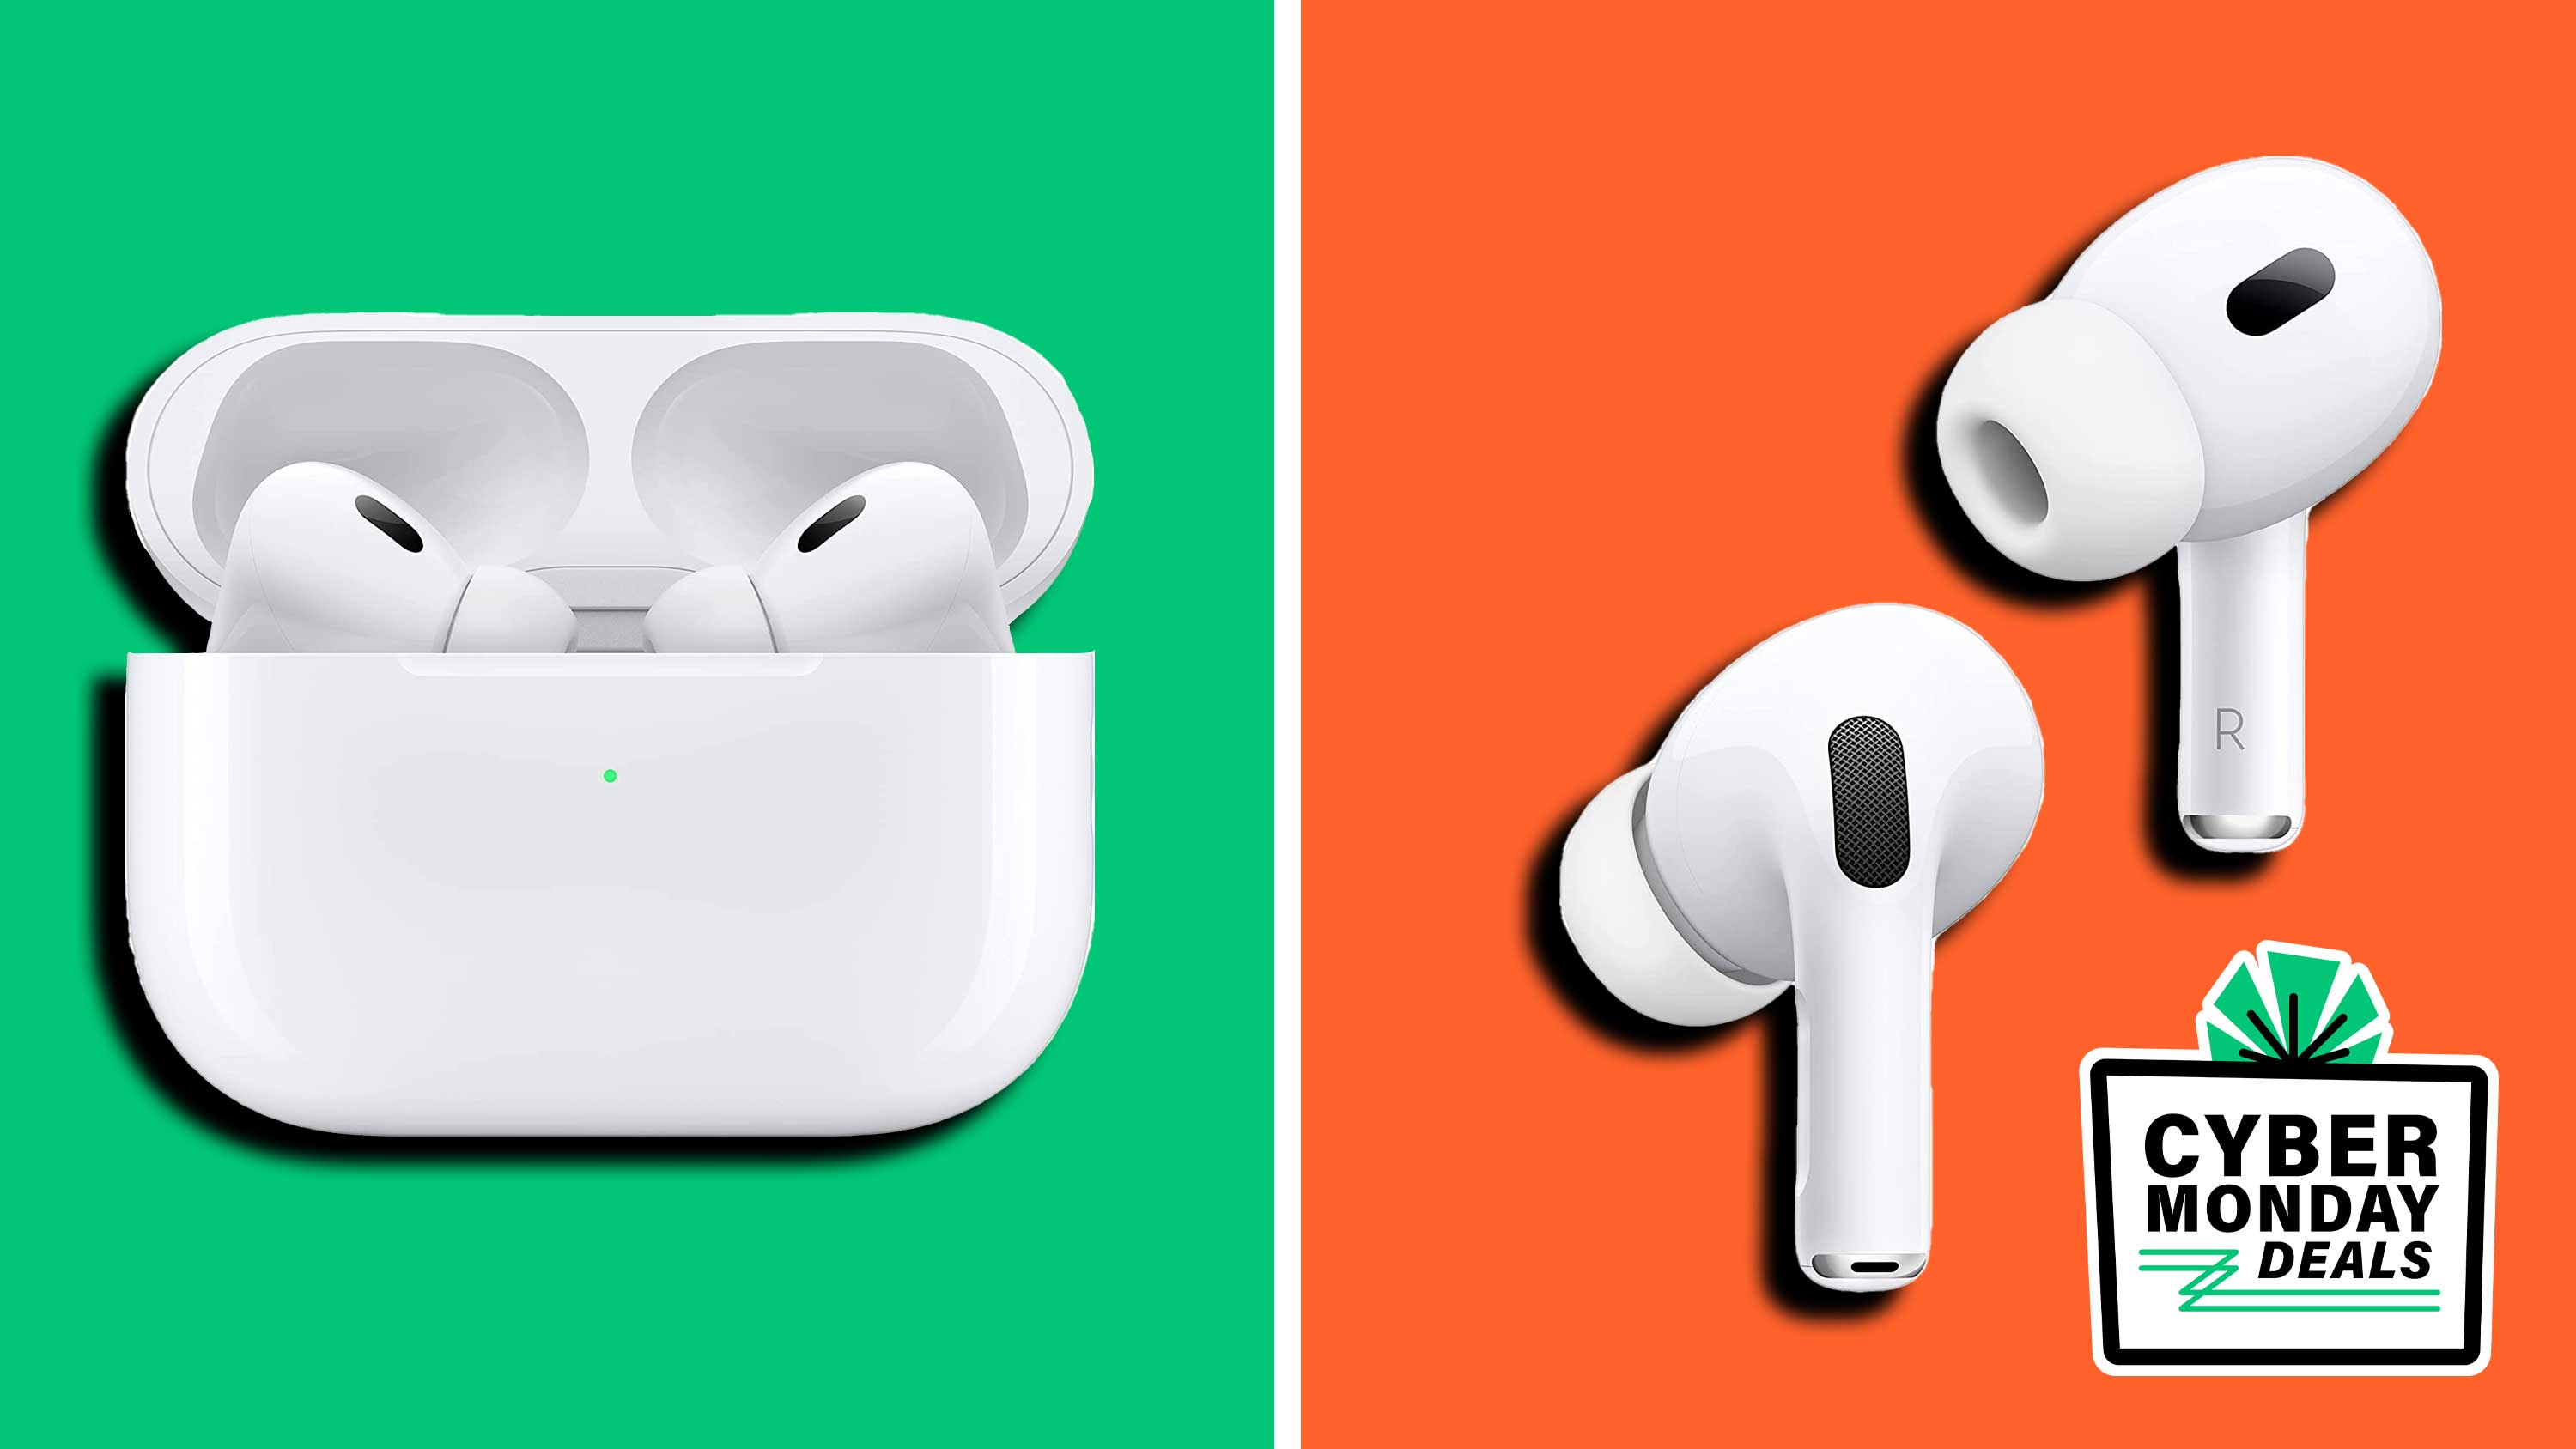 Cyber Monday 2022 deal: 20% off the new Apple AirPods Pro at Amazon